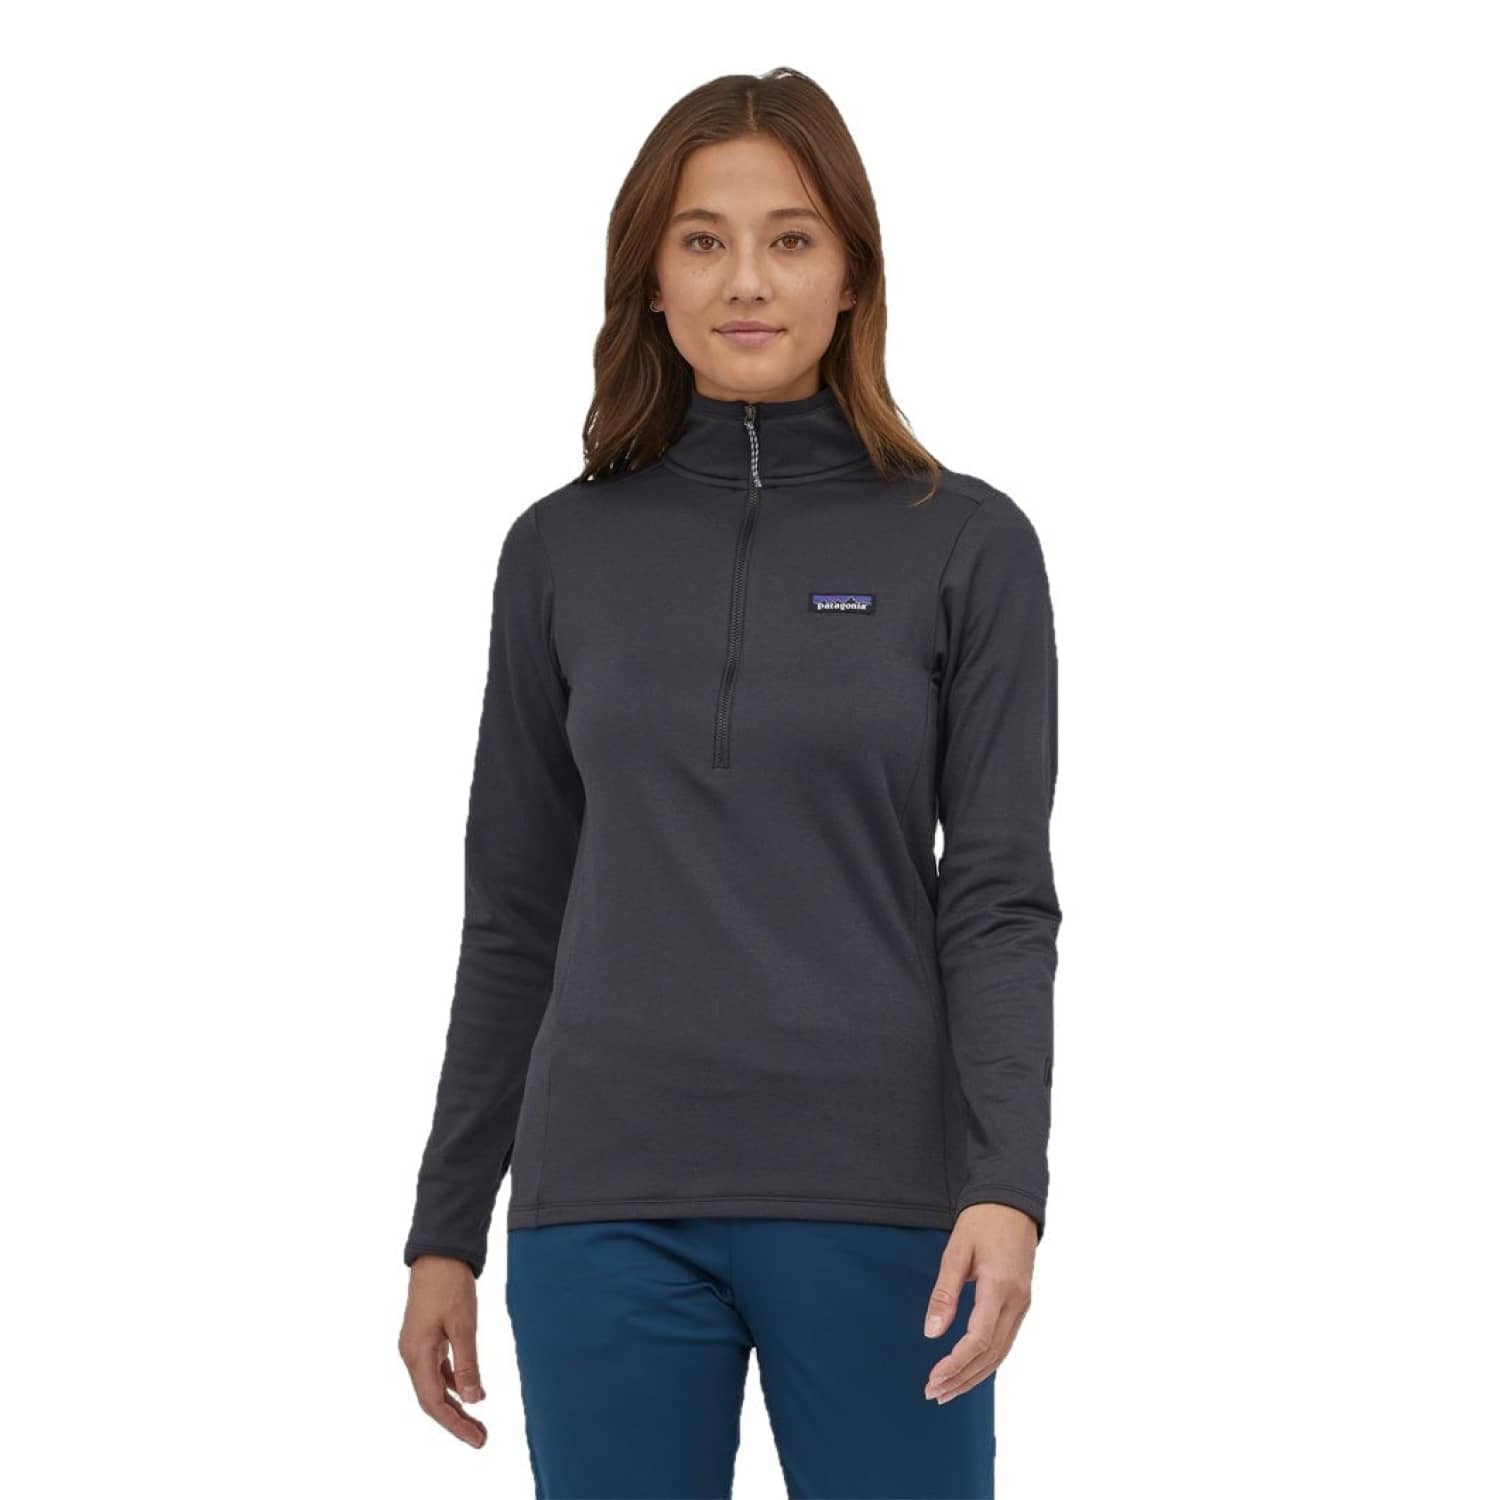 Patagonia W's R1® Daily Zip-Neck, Ink Black X-Dye, front view on model